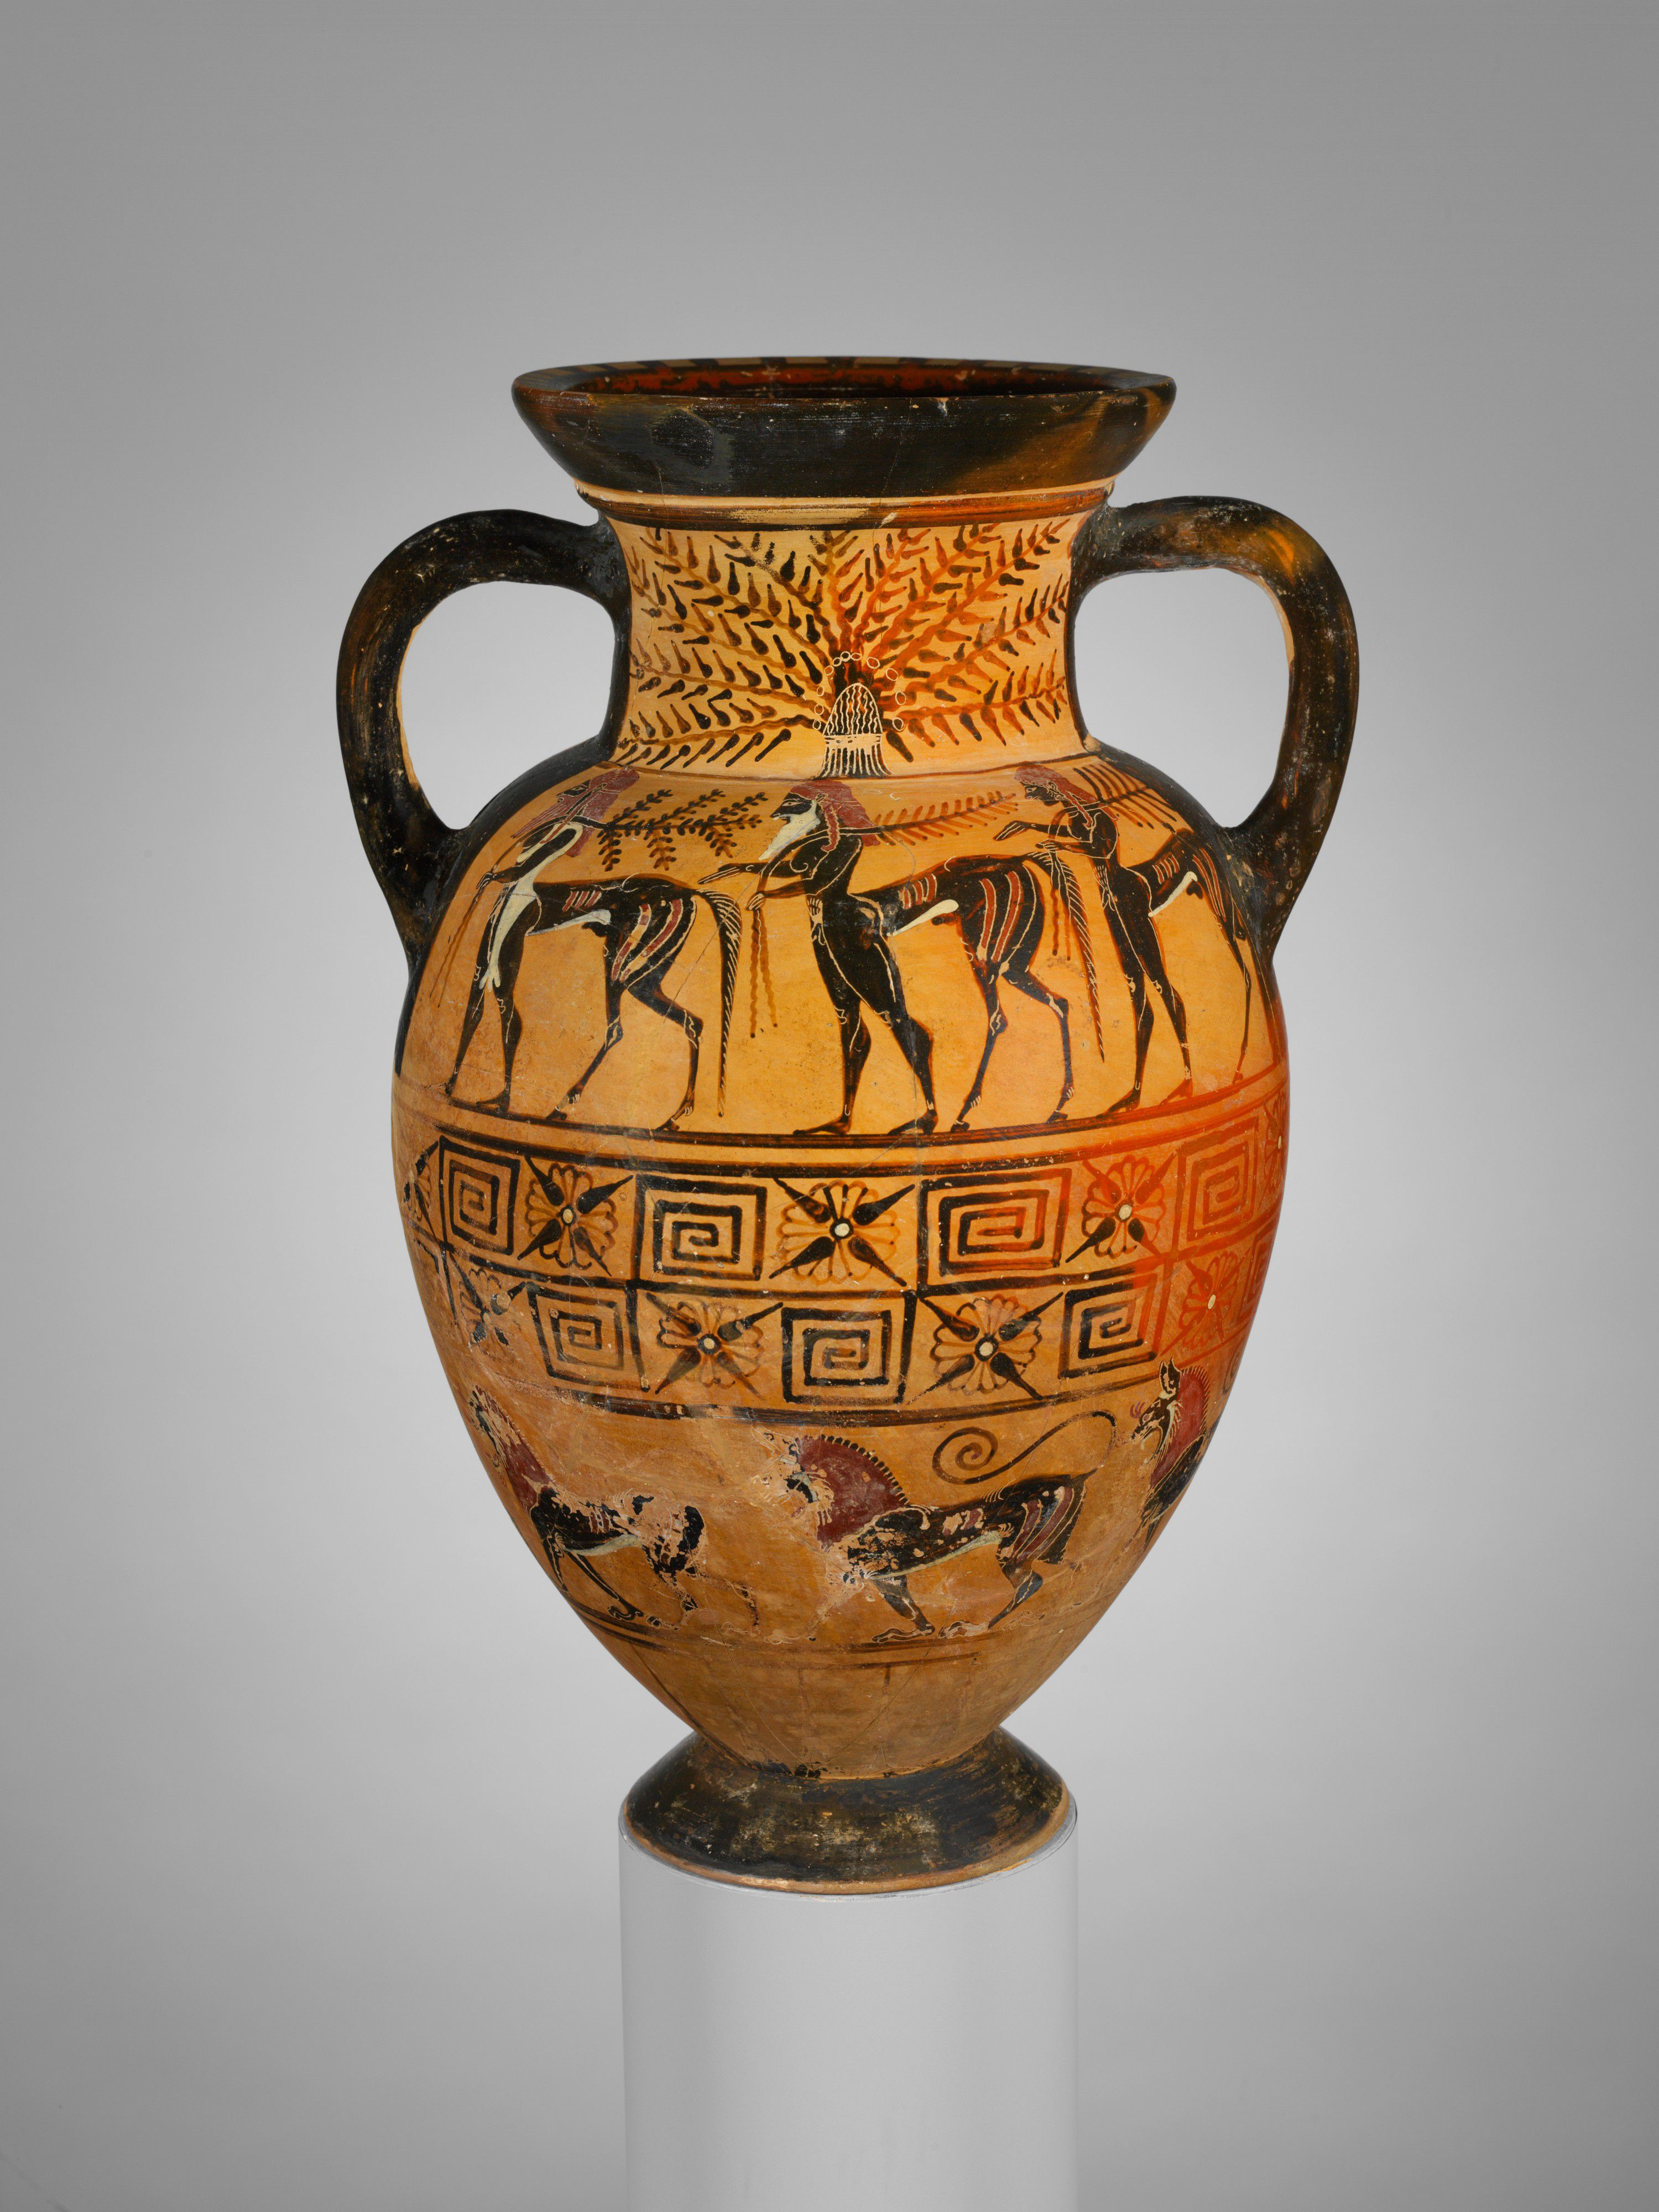 30 Great Greek Amphora Vase 2024 free download greek amphora vase of etruscan art stylistic innovations in ancient italy with etruscan vase 58a6f3725f9b58a3c919f238